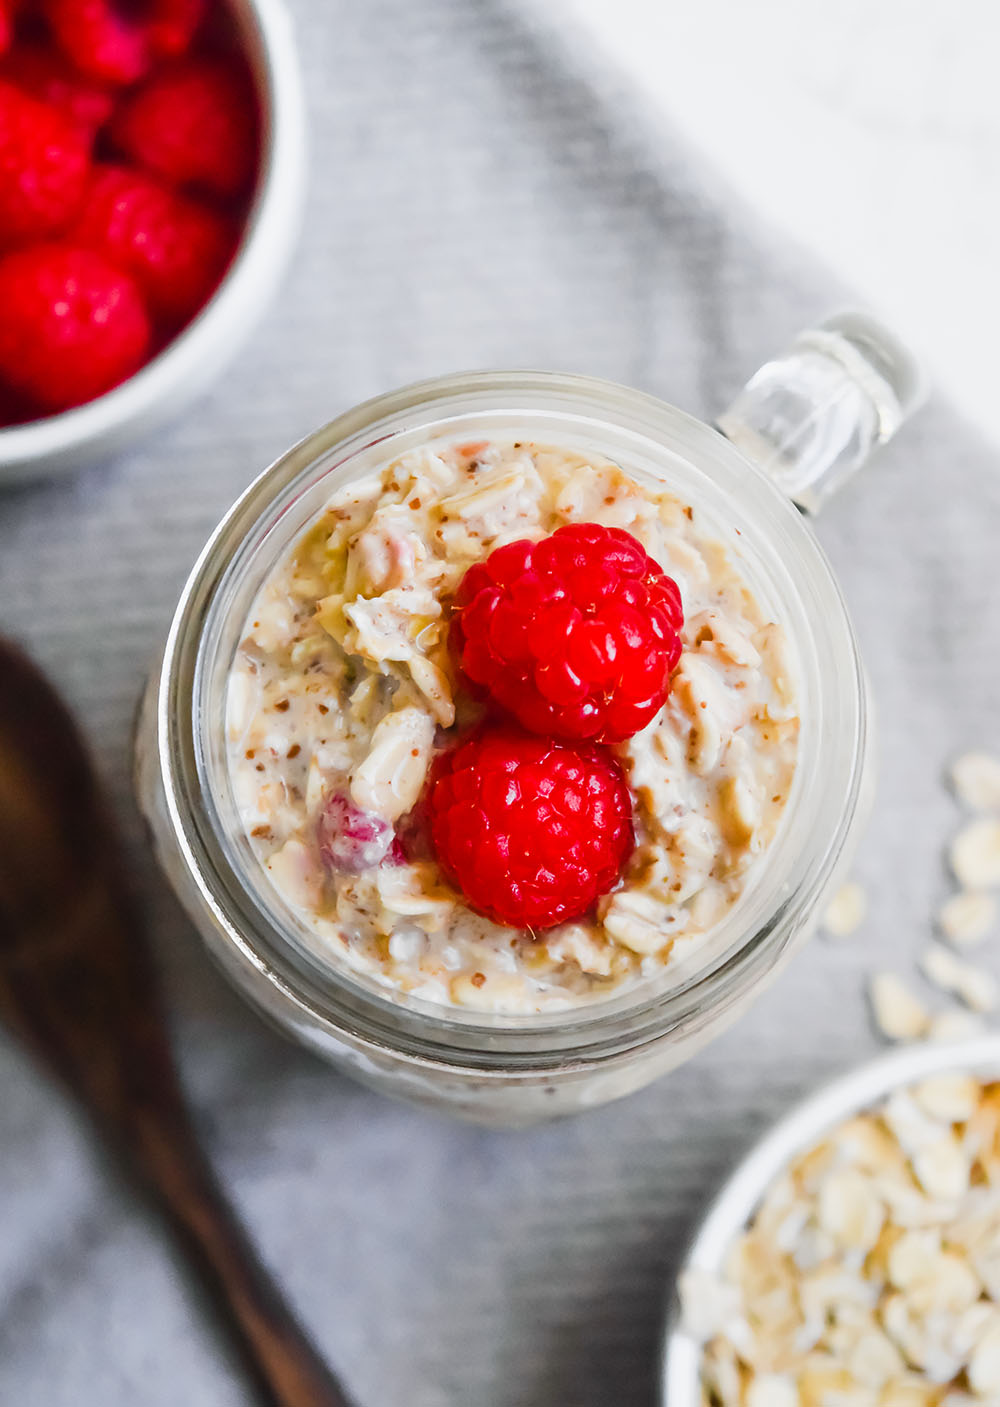 Vegan Peanut Butter and Jelly Overnight Oats